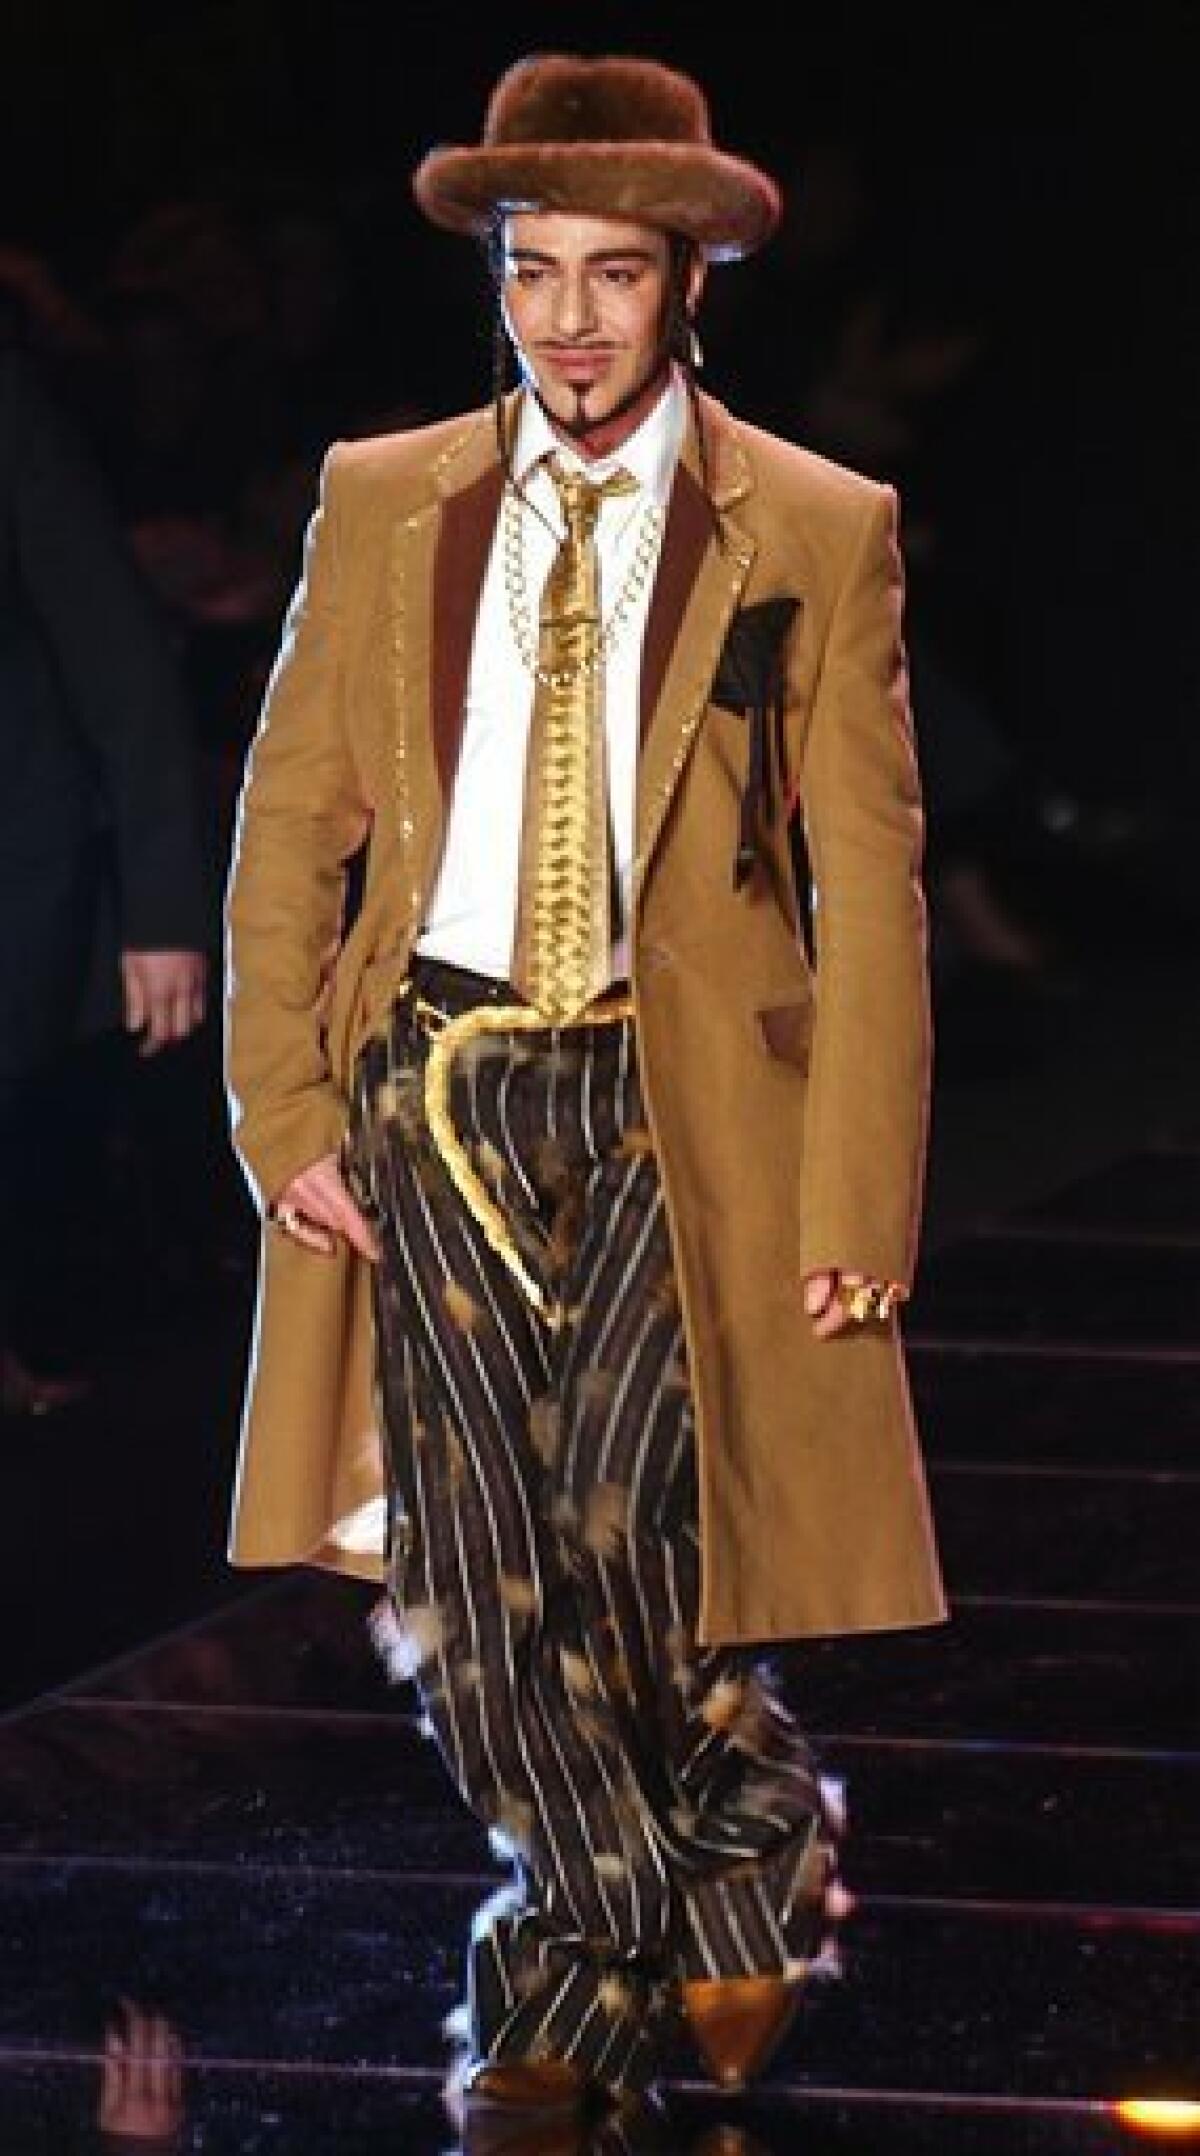 The John Galliano label starts a new chapter in its history